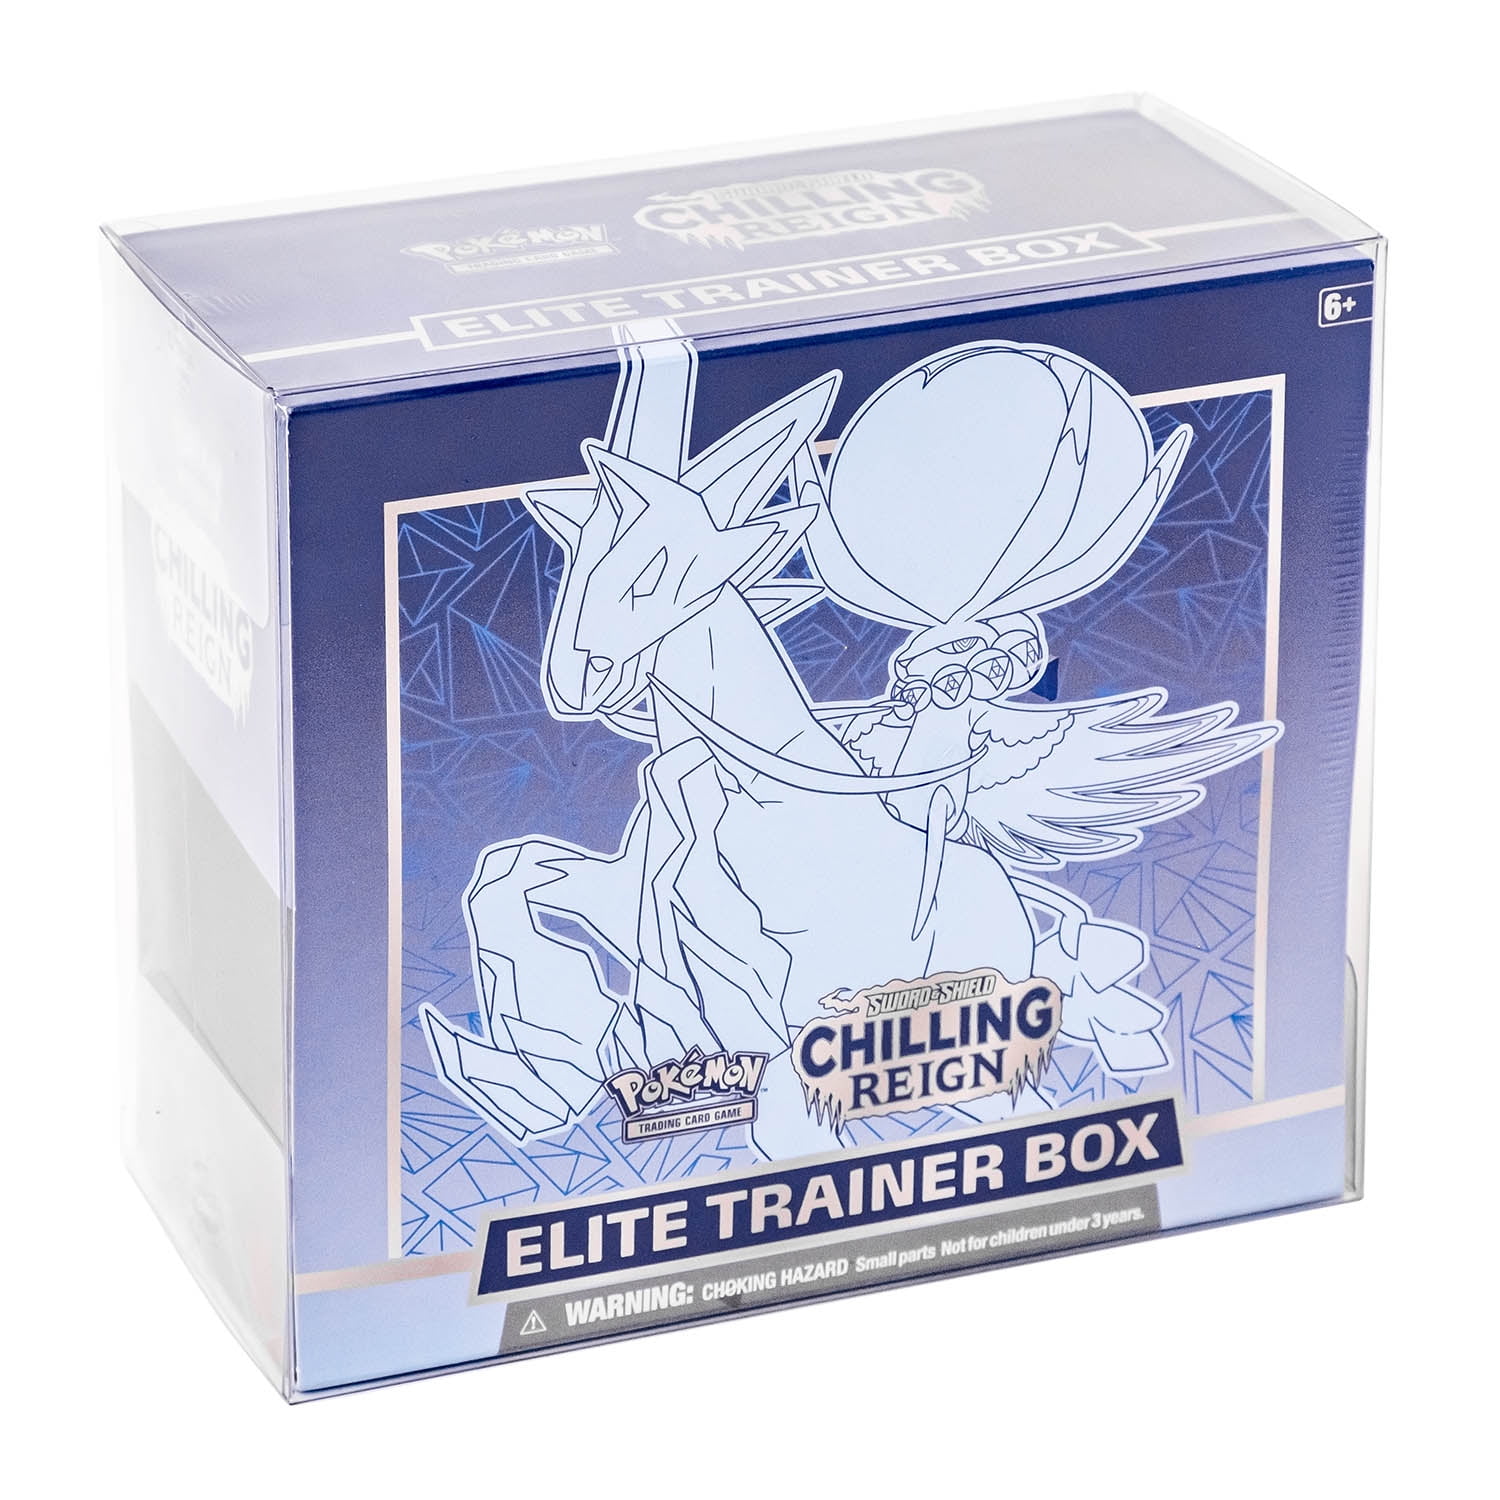 Cards Holder Case for PM TCG, 450+ Card Game Storage Binder, Trading Card Box Fits for PM EX/ GX (paiyule Box Only), Size: One size, Blue